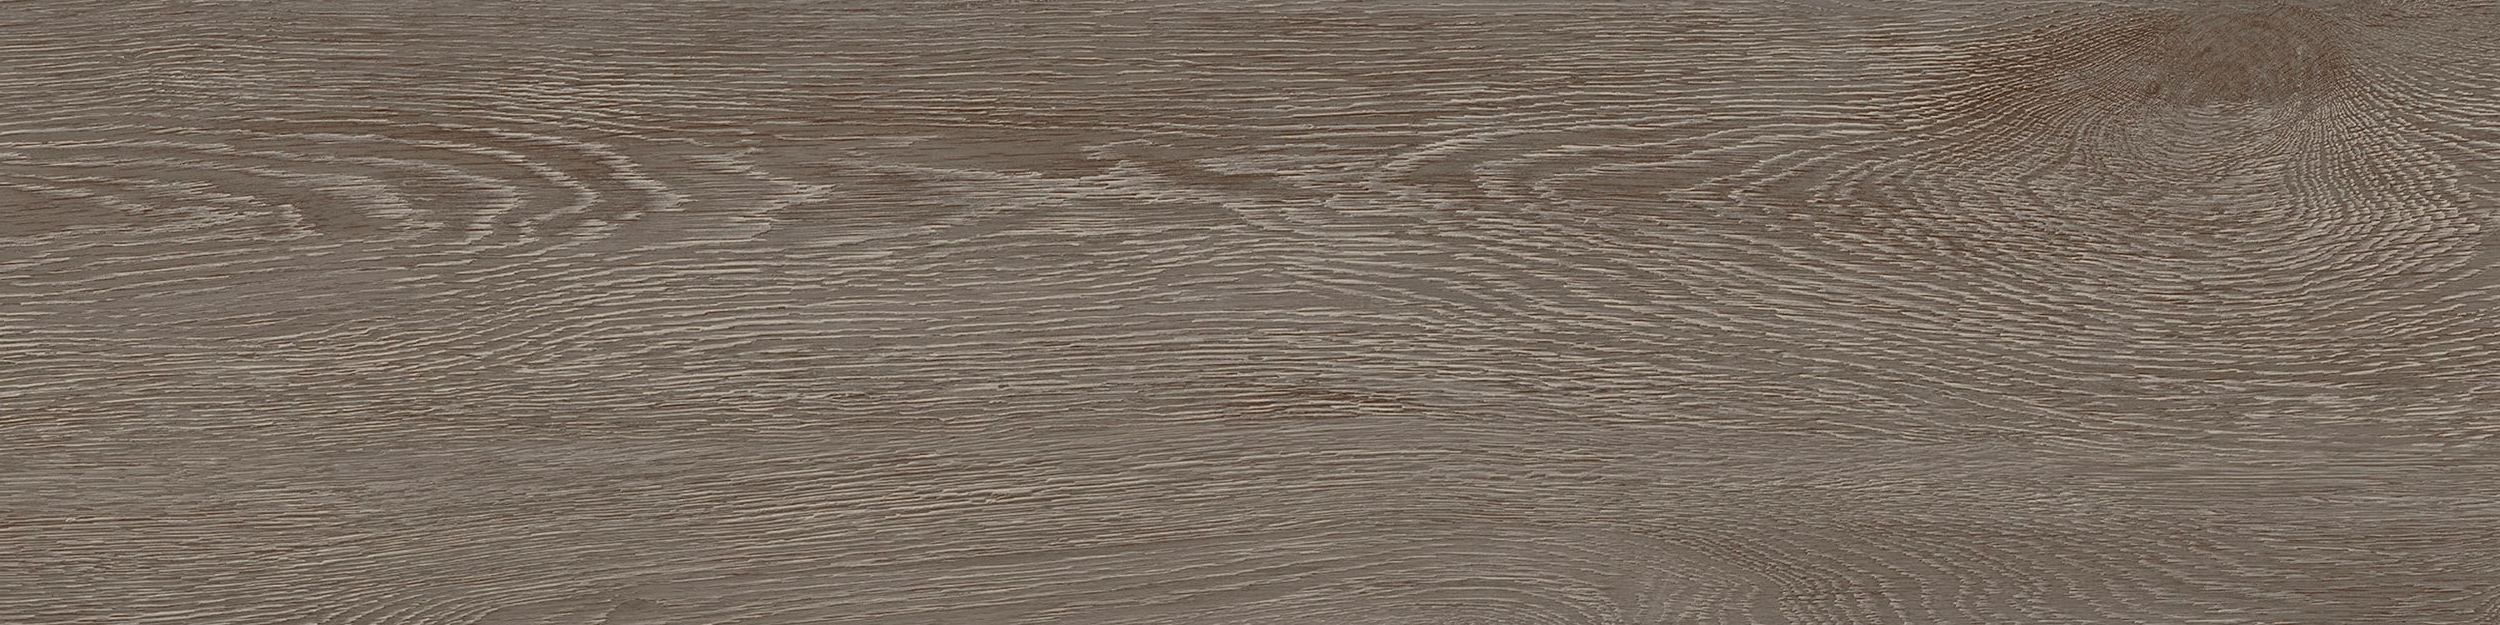 Textured Woodgrains LVT In Charcoal Dune image number 1